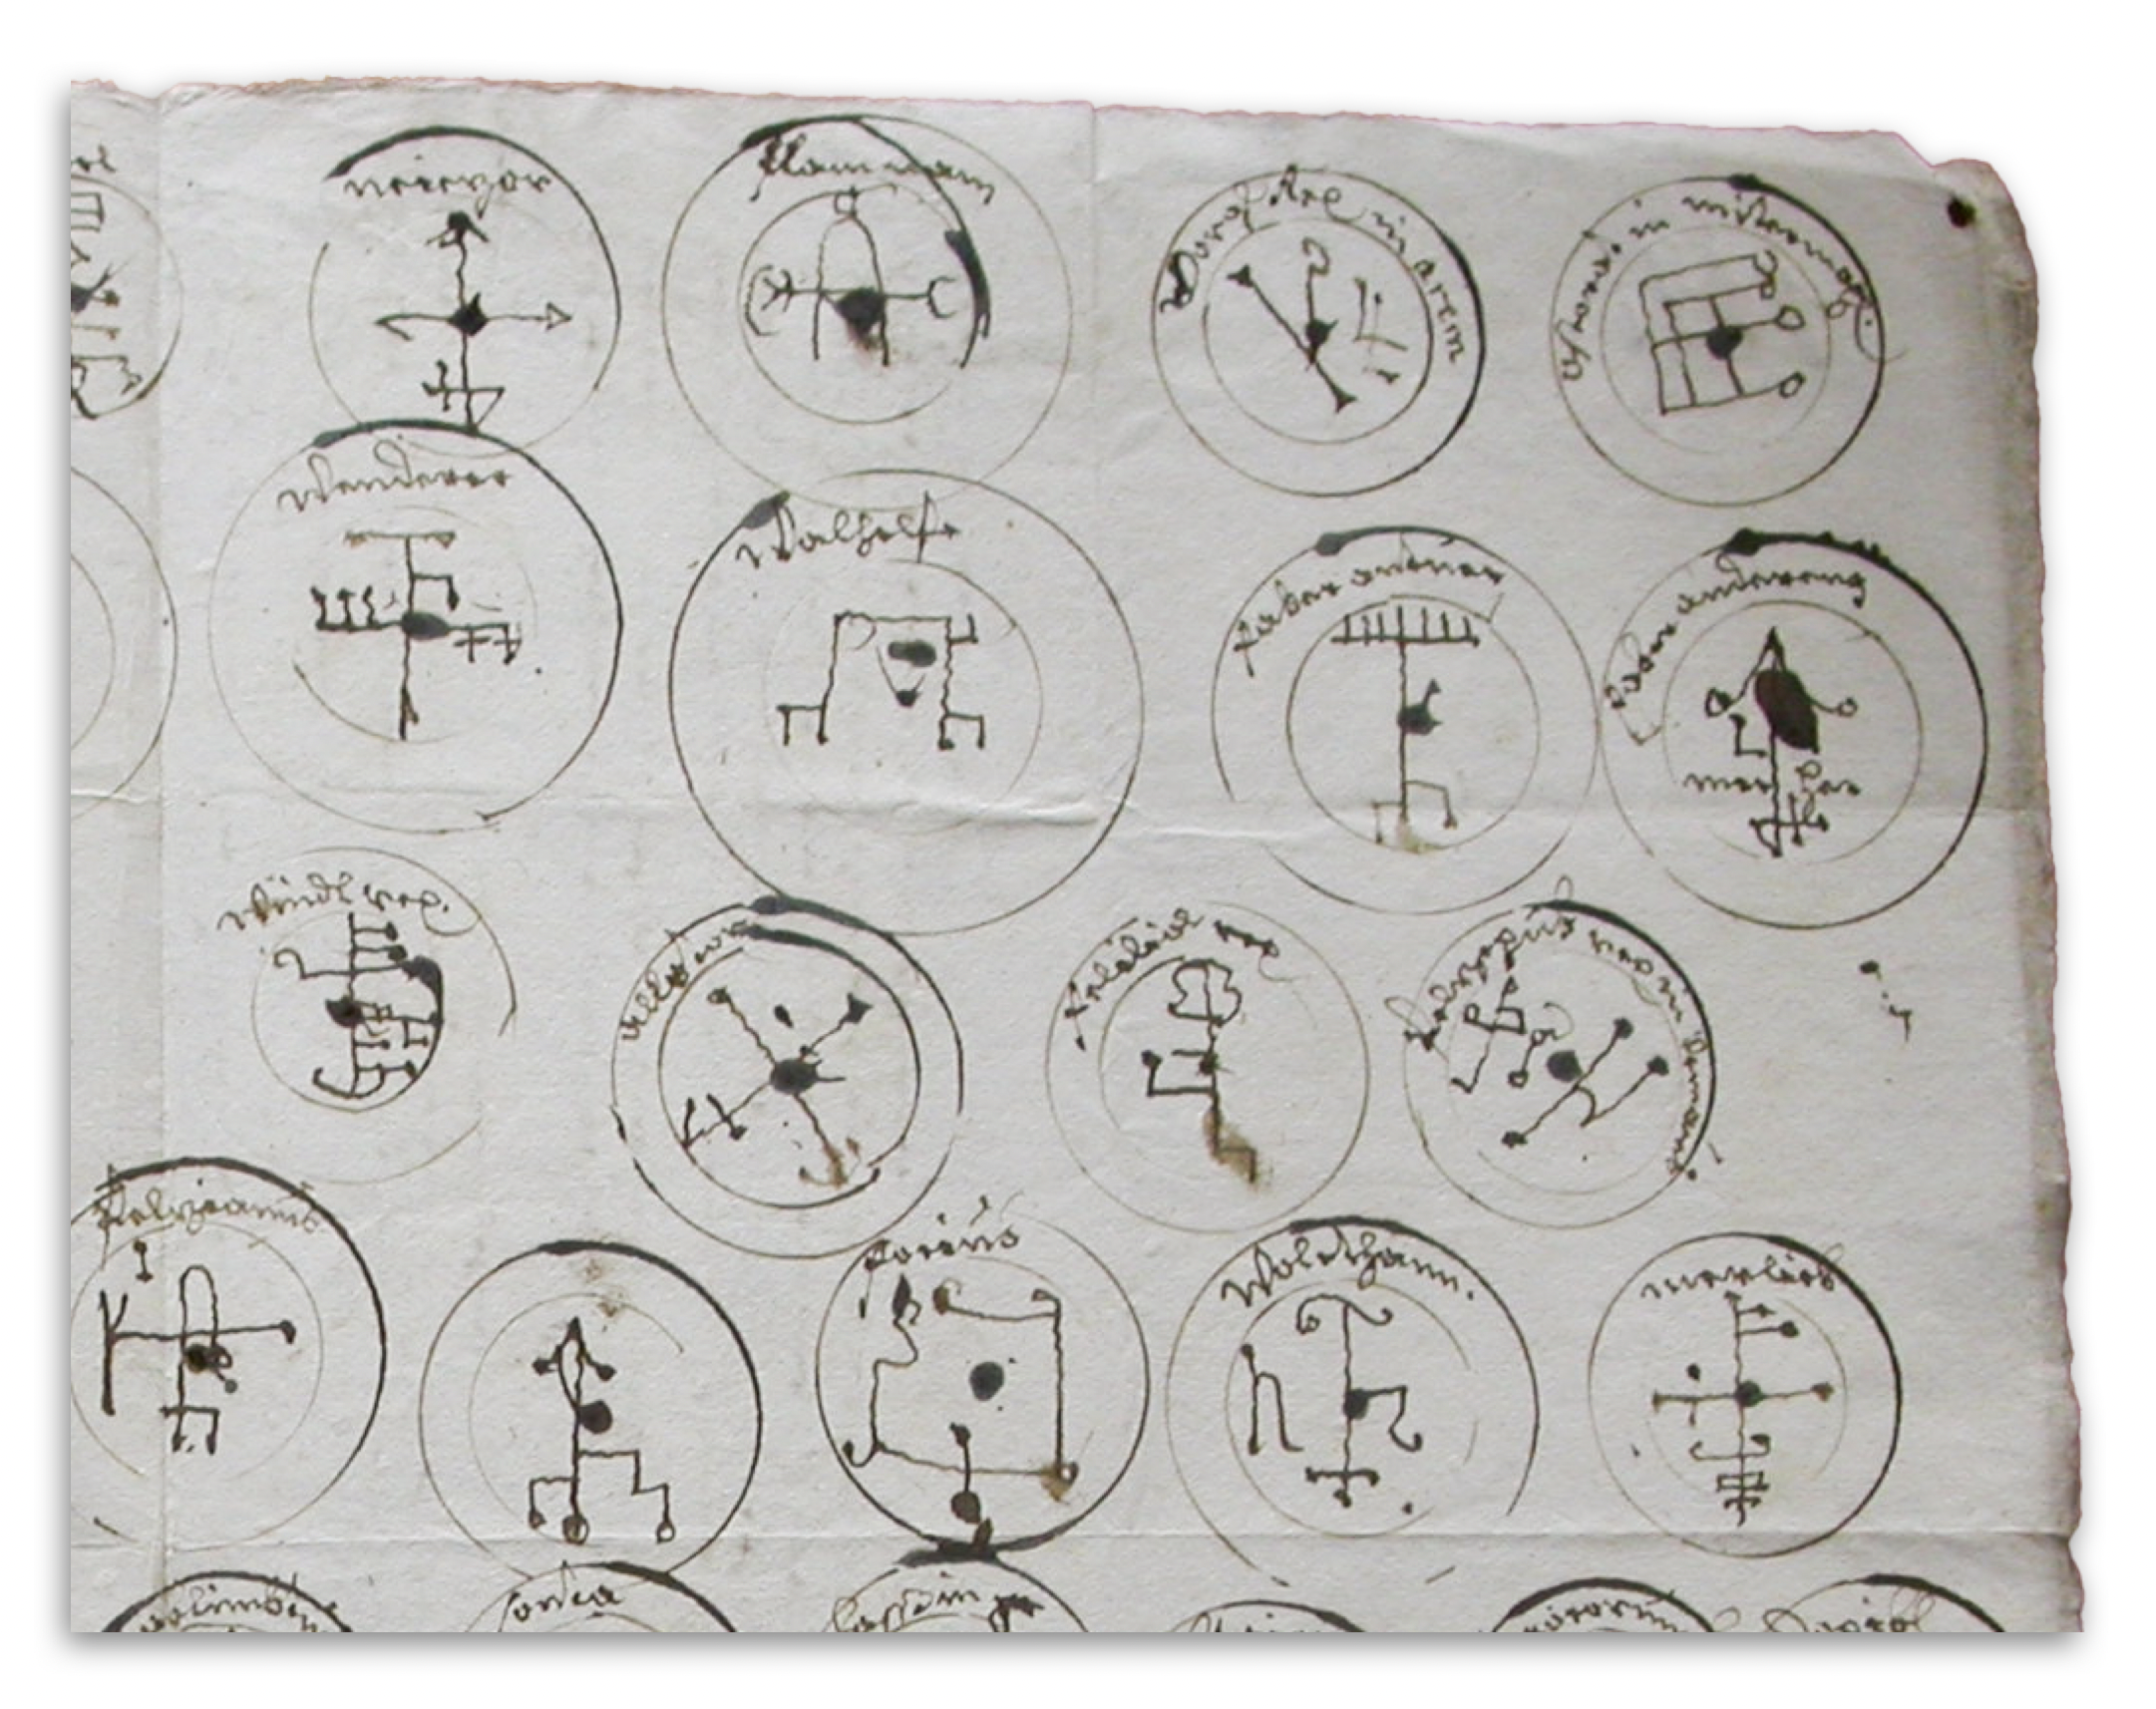 [close up, top right] 72 Devil's Seals from the trial records of Ludwig Perkhofer, 1683